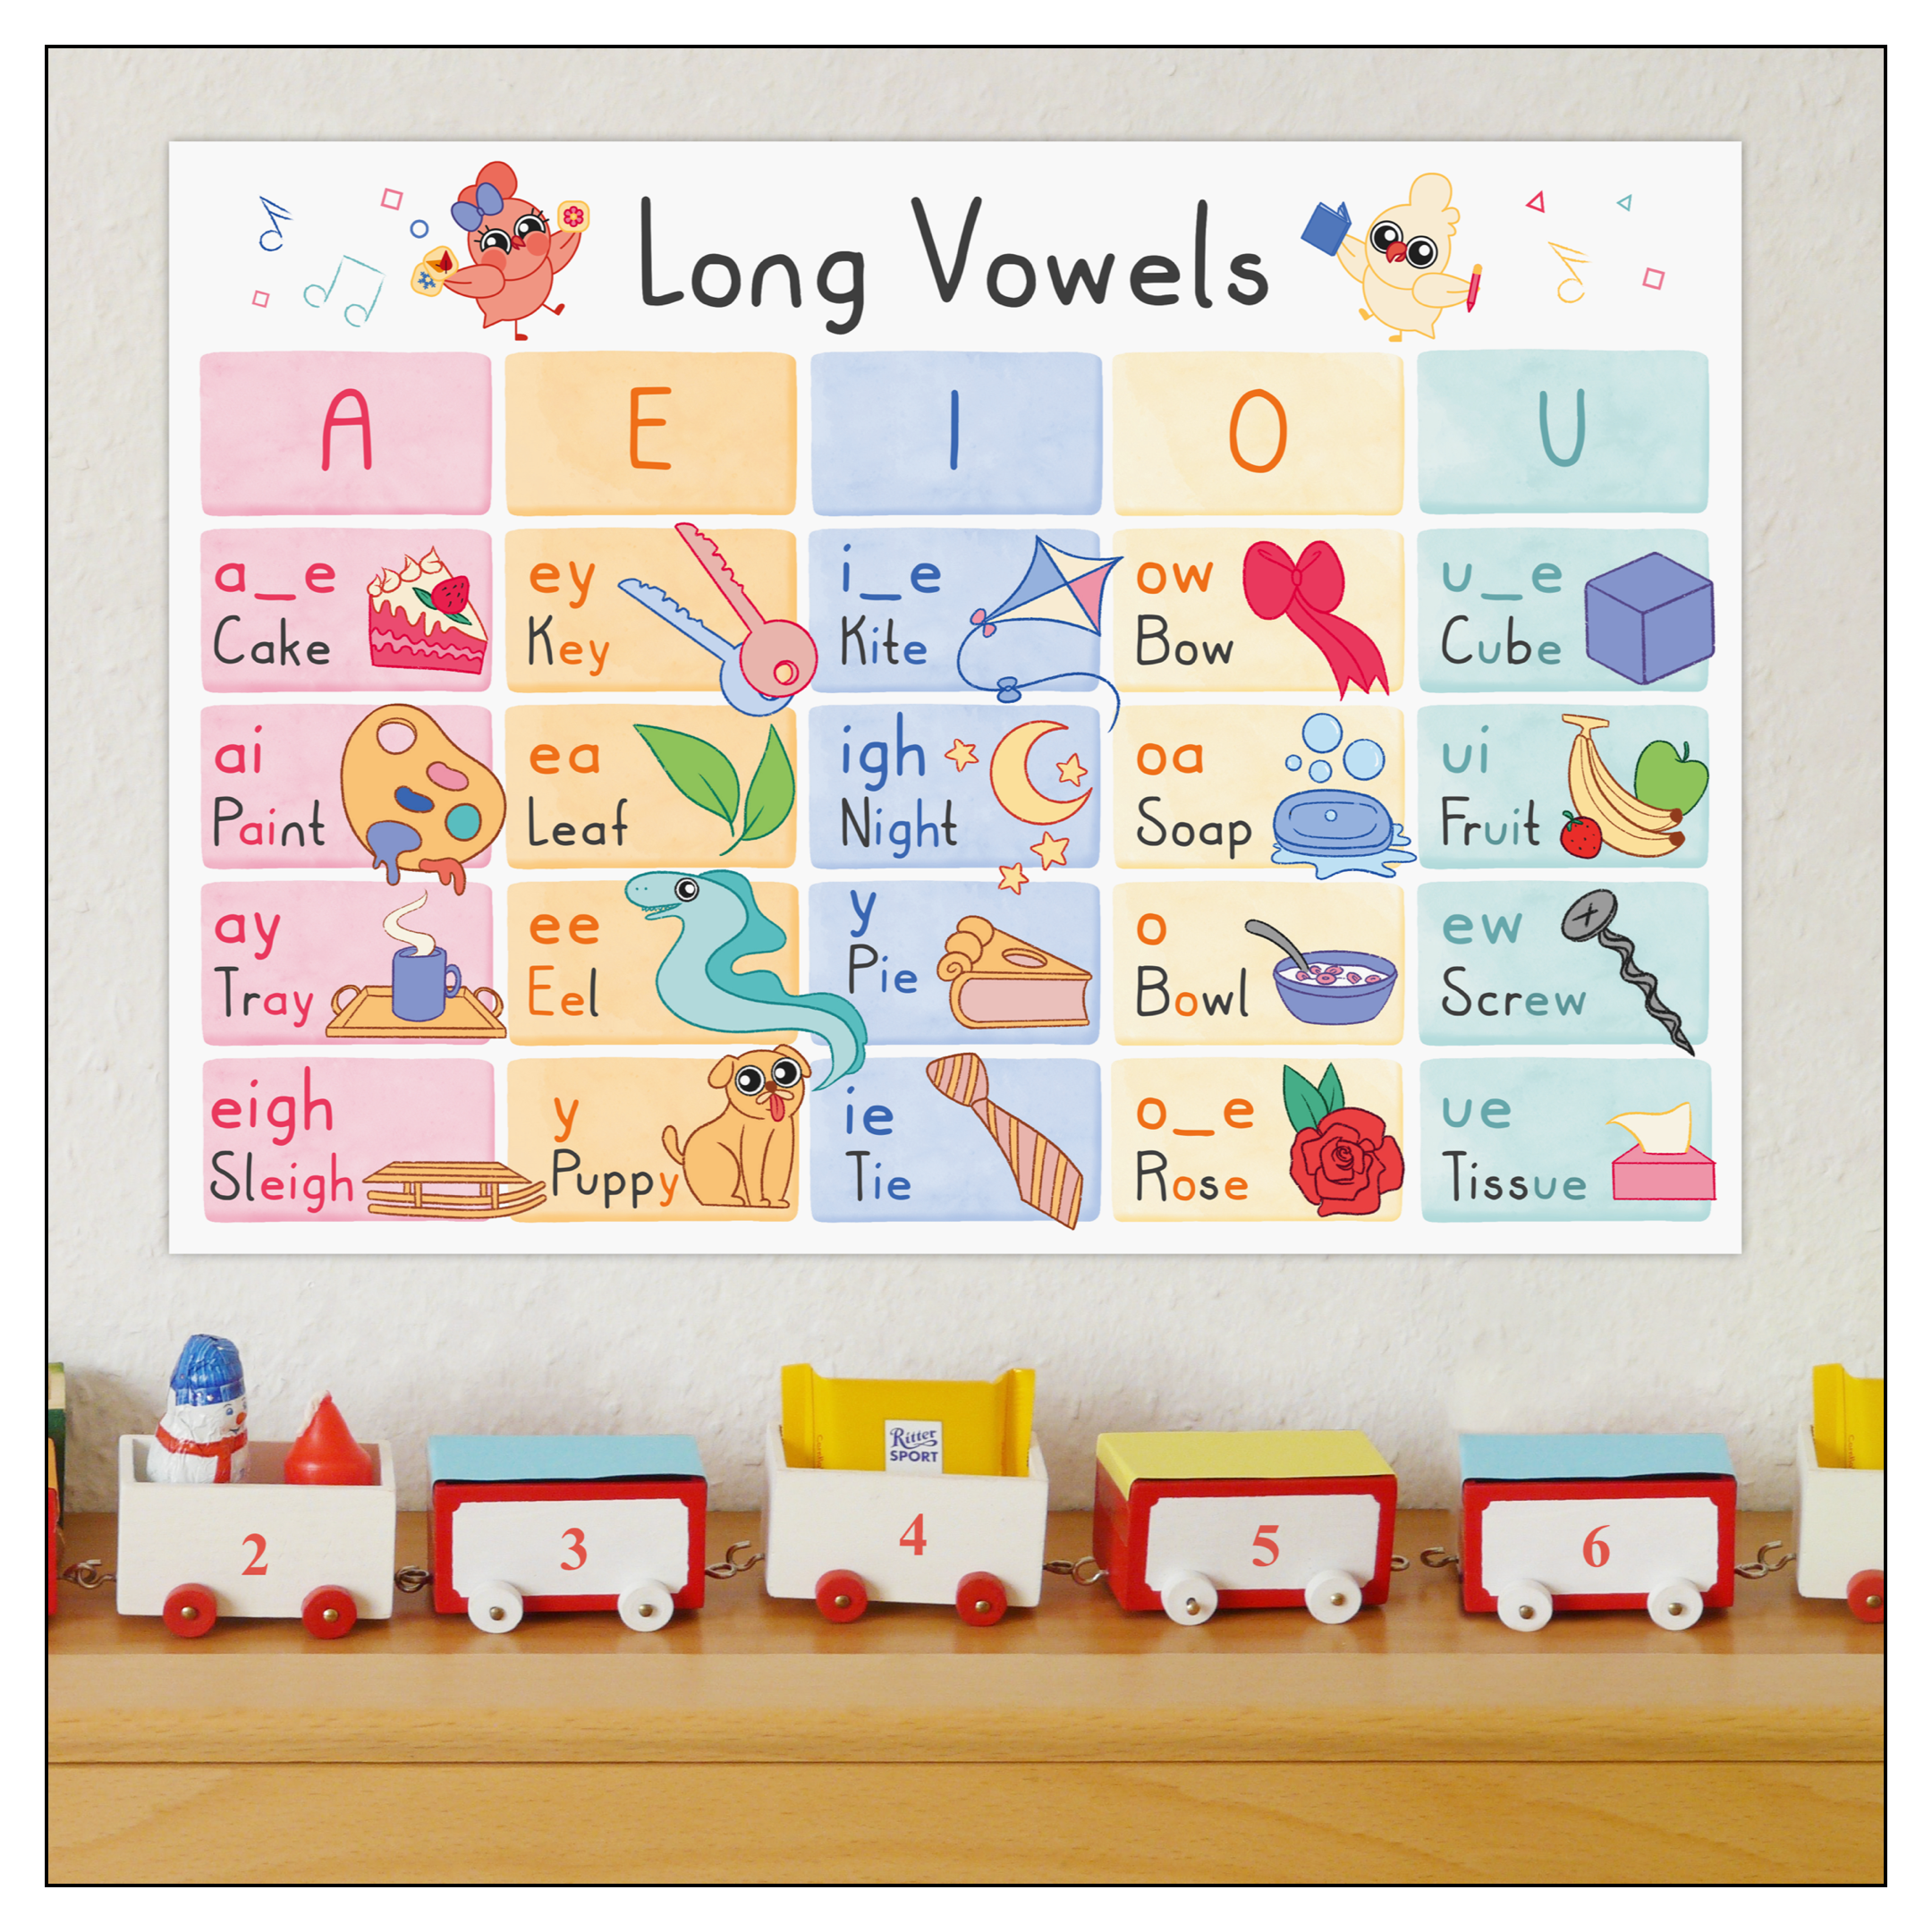 link-in-bio_Resources-long-vowels